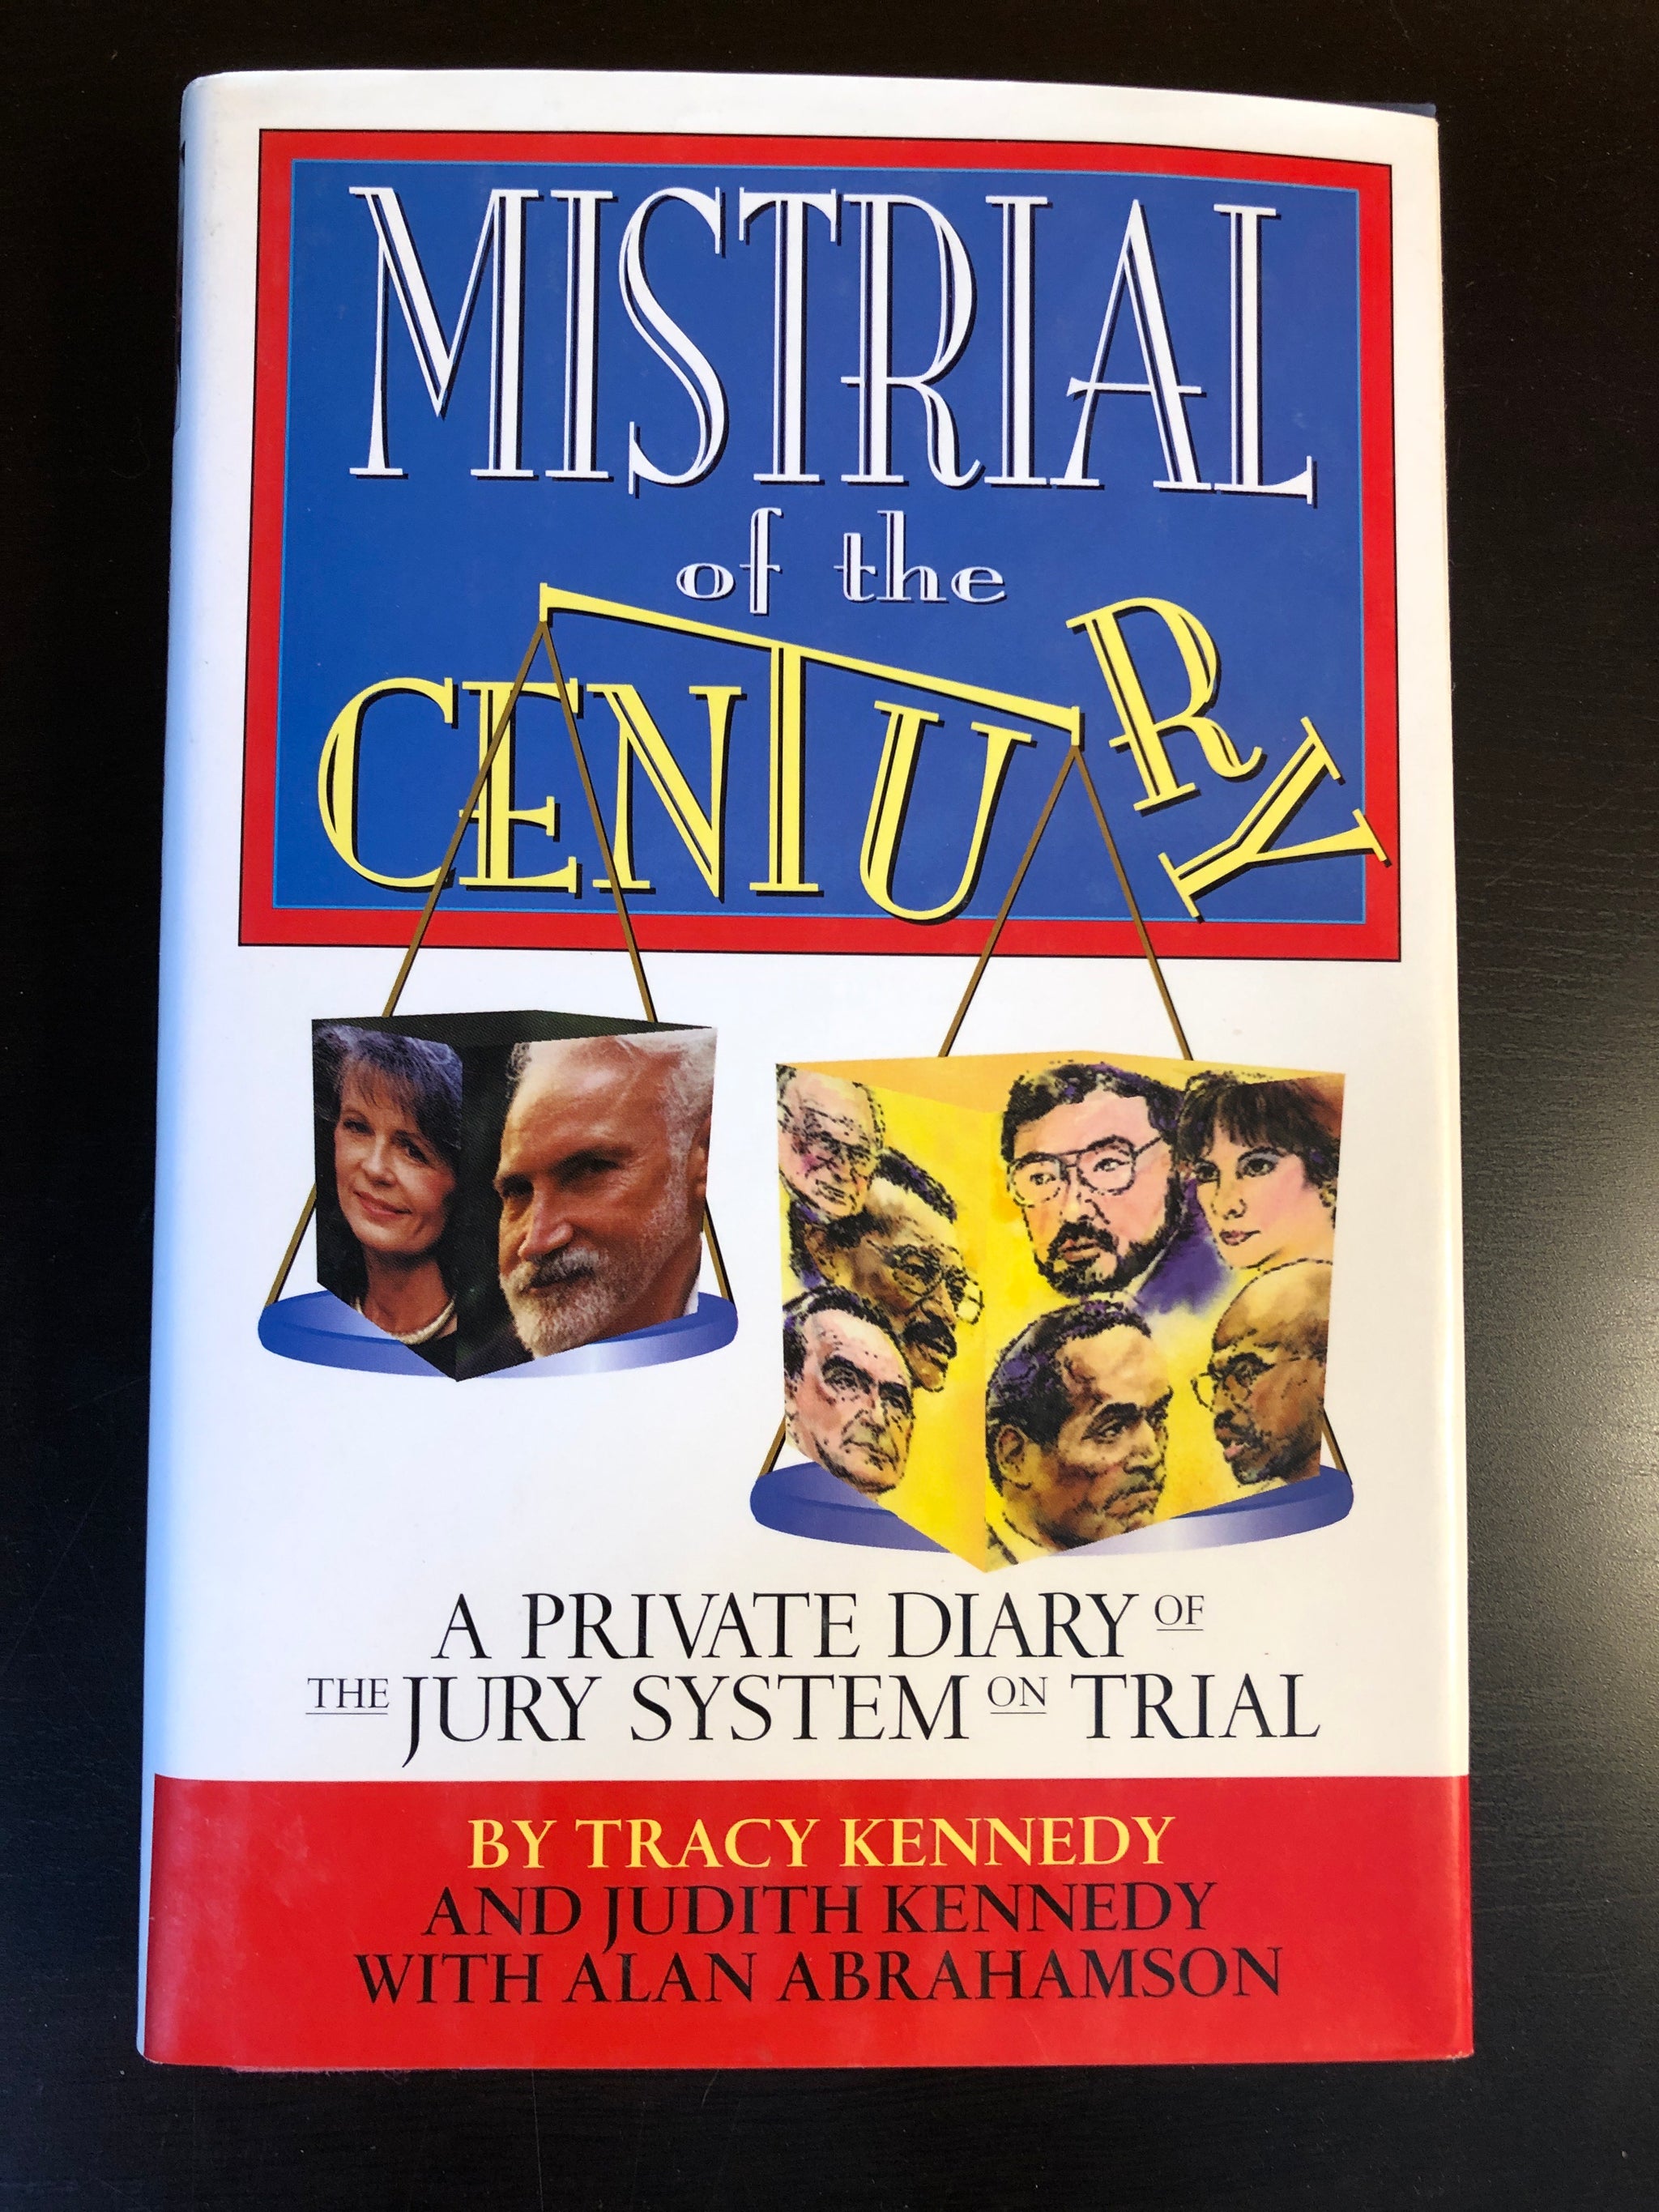 123 – Tagged Mistrial of the Century– Exhibit B. Books